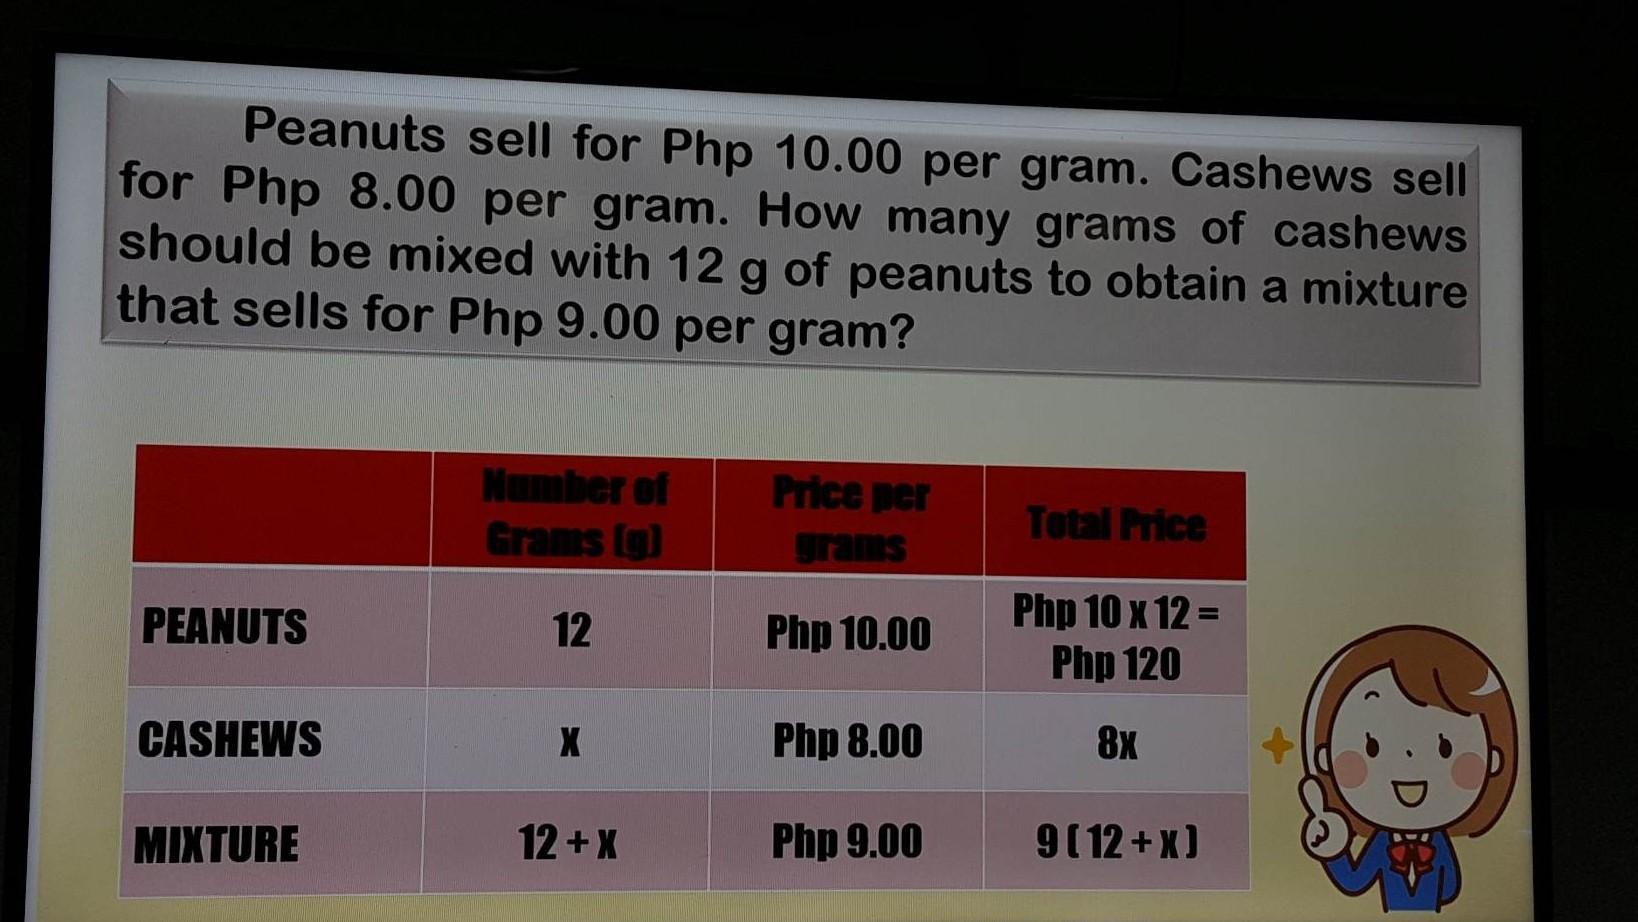 Peanuts Sell For Php 10.00 Per Gram. Cashews Sell For Php 8.00 Per Gram. How Many Grams Of Cashews Should